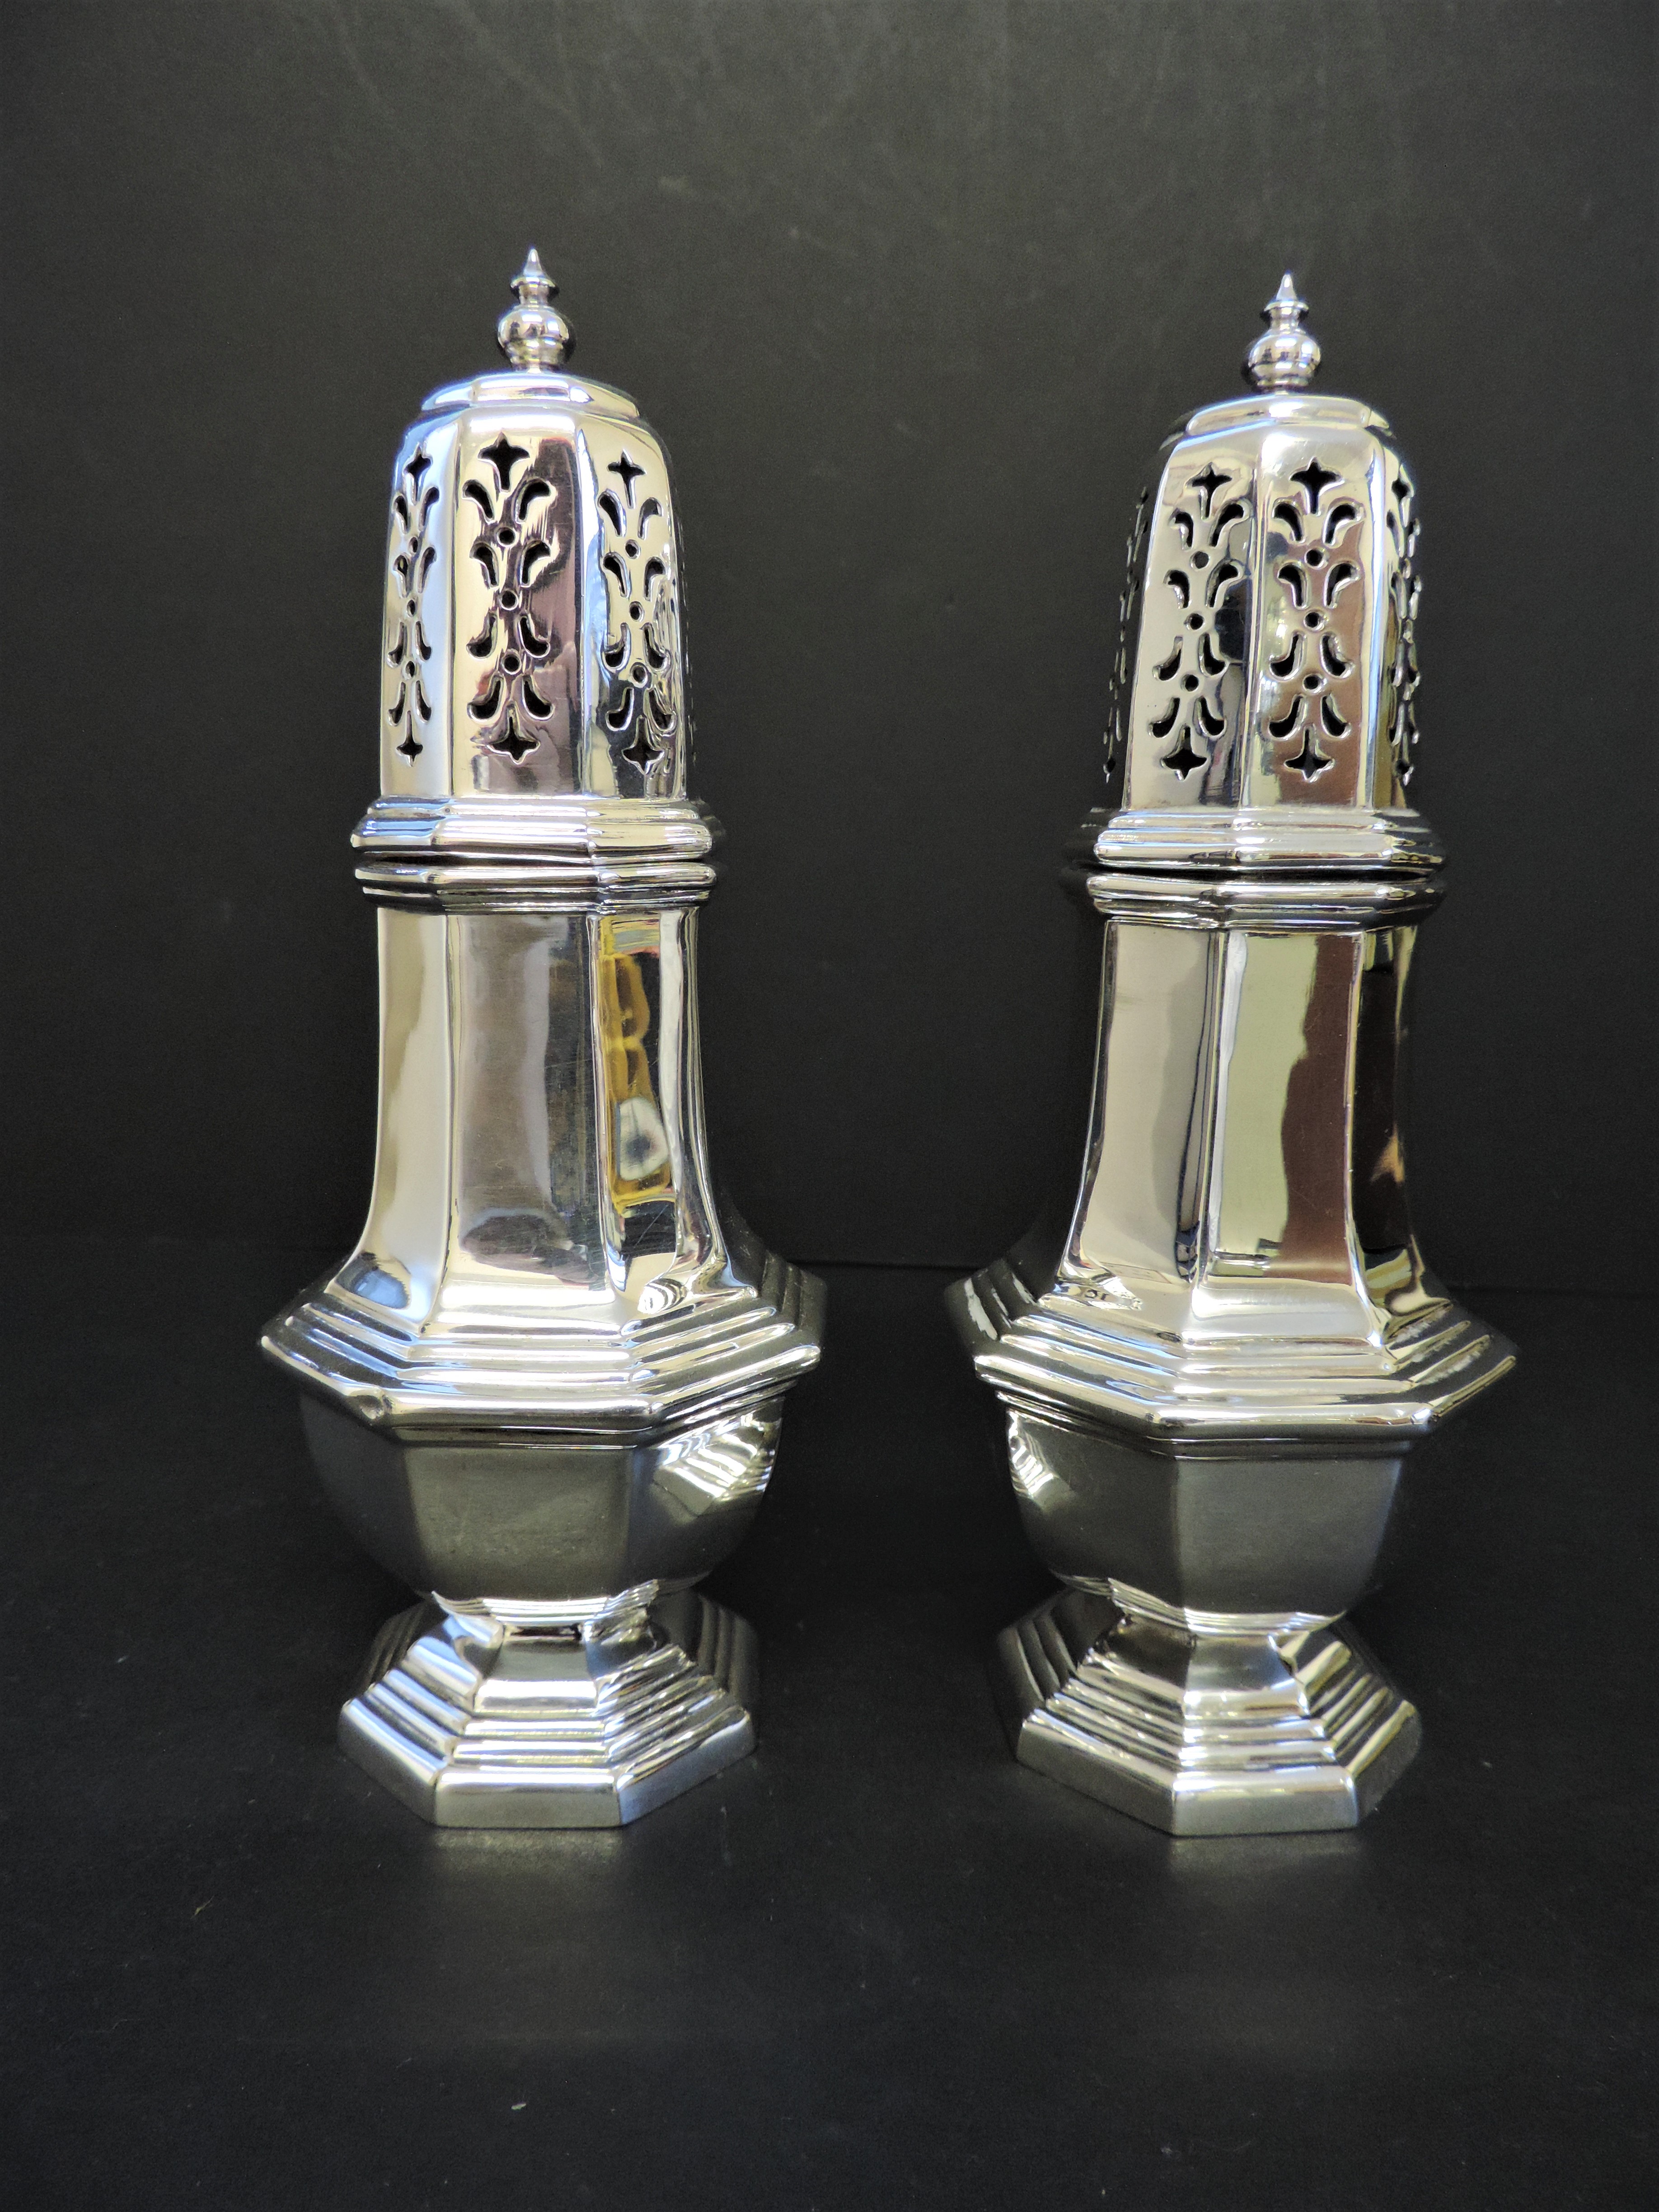 Pair Art Deco Silver Plated Sugar Shakers circa 1920's - Image 5 of 10